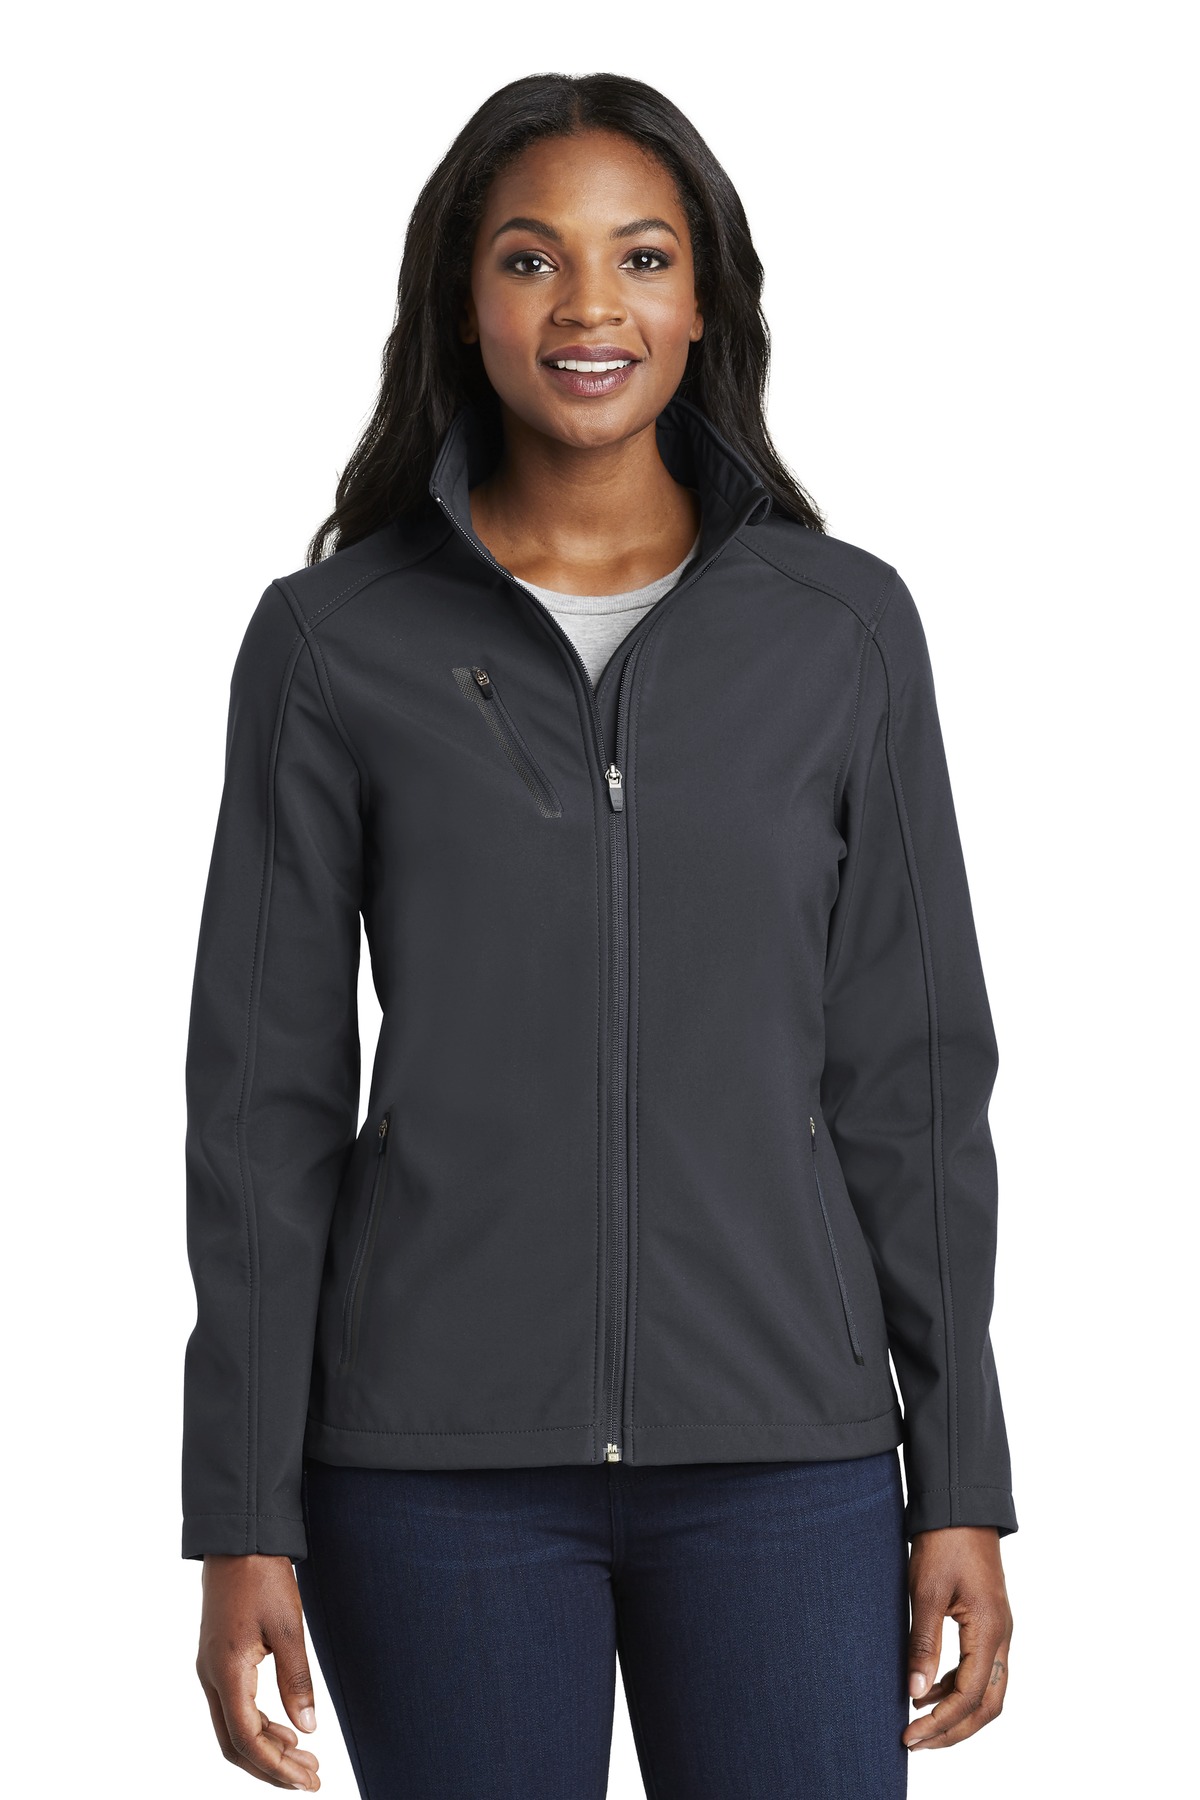 Port Authority Ladies Welded Soft Shell Jacket - L324